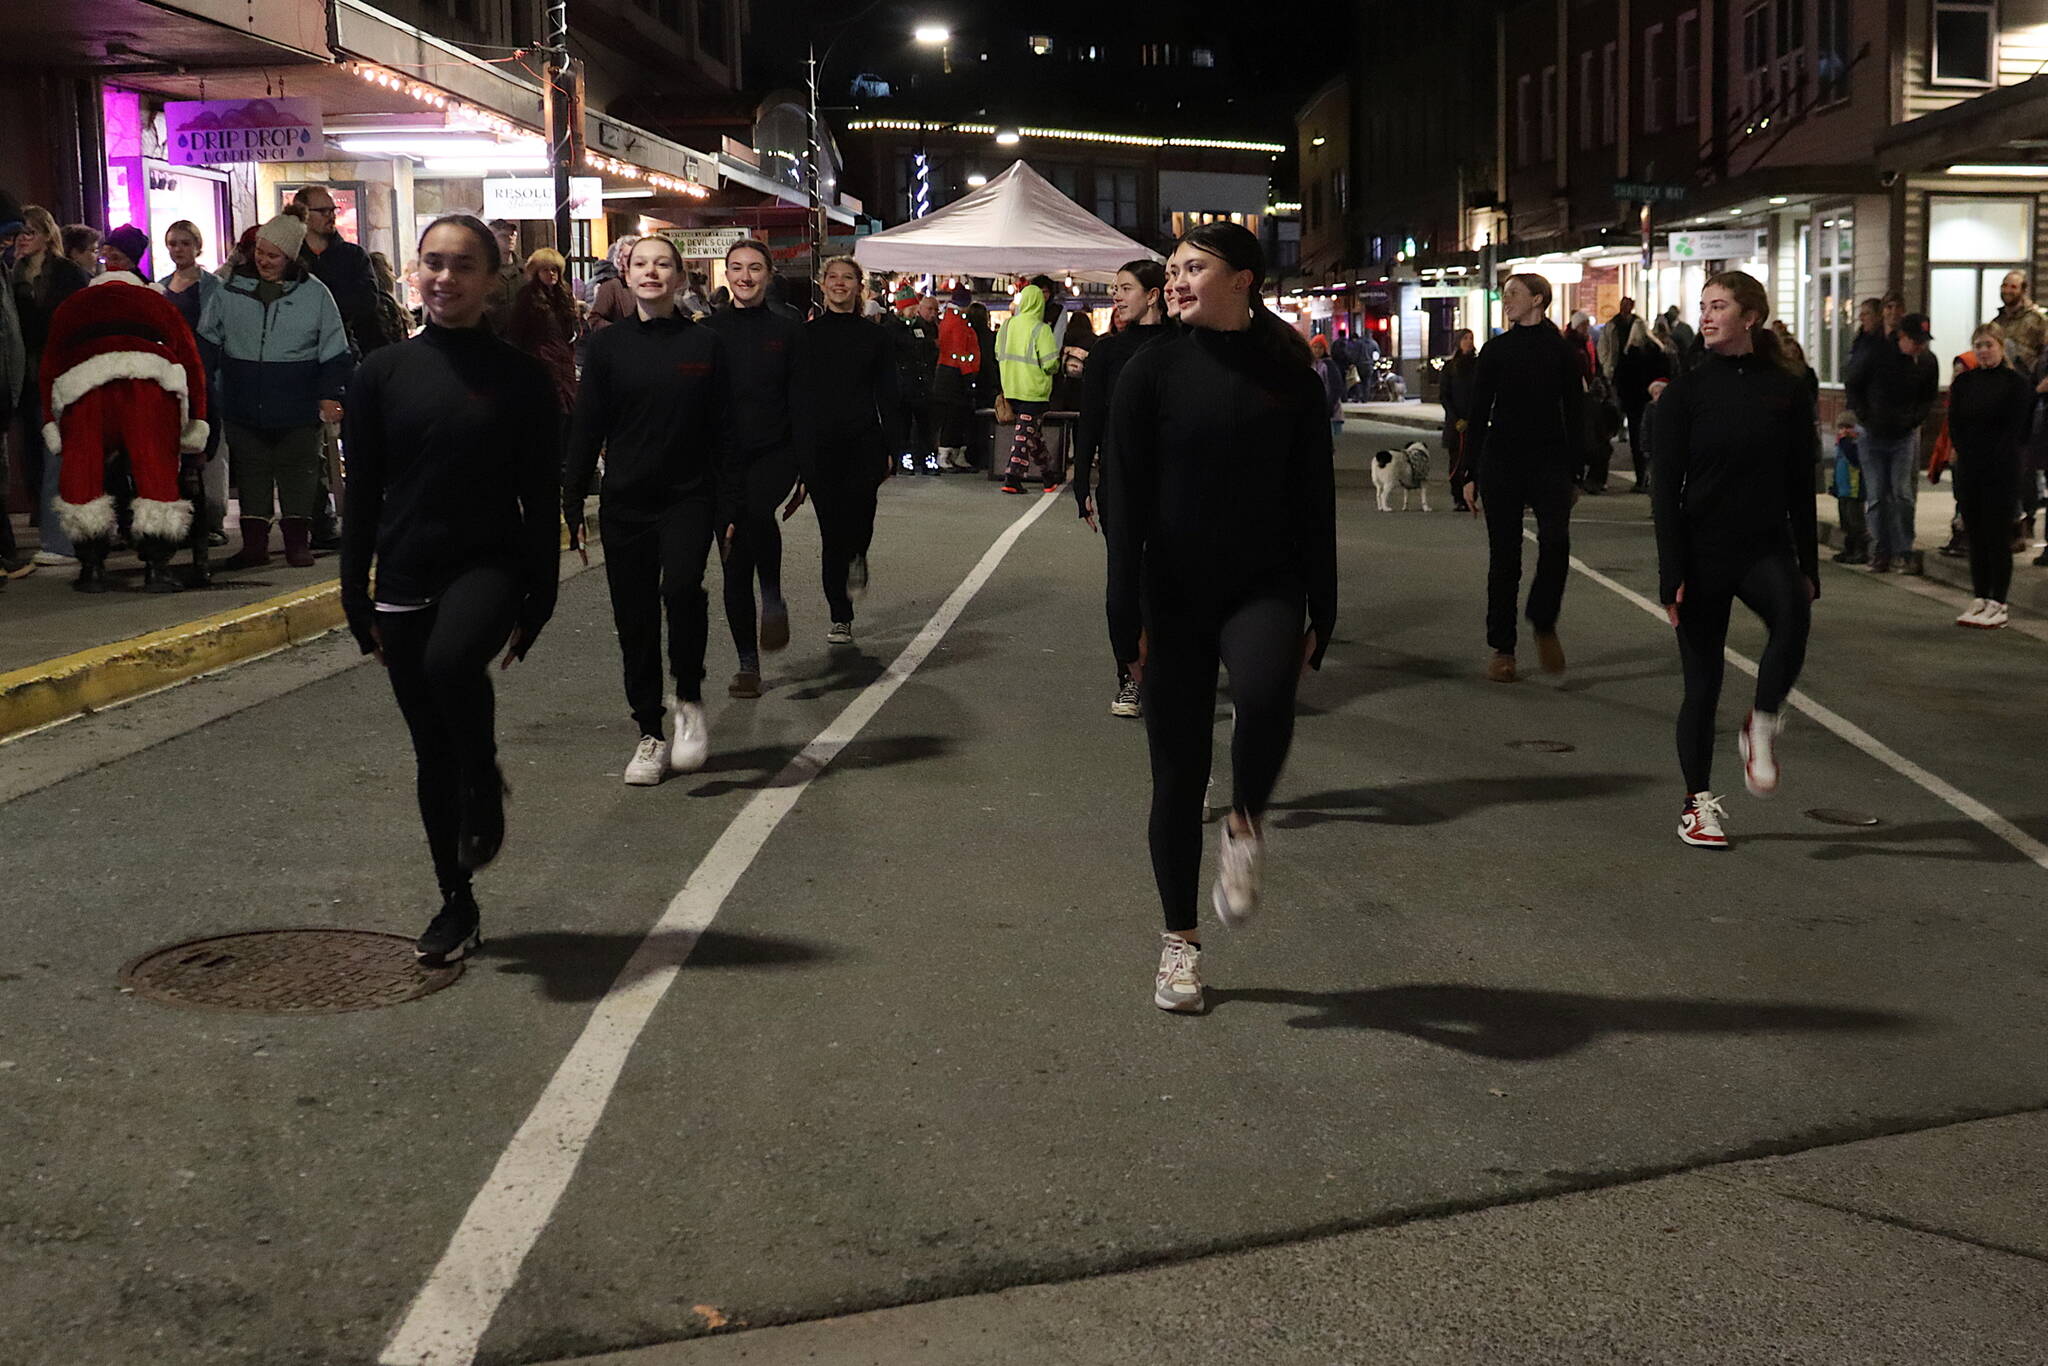 The Juneau-Douglas High School: Yadaa.at Kalé drill team performs a routine on Front Street during Gallery Walk on Friday night. (Mark Sabbatini / Juneau Empire)